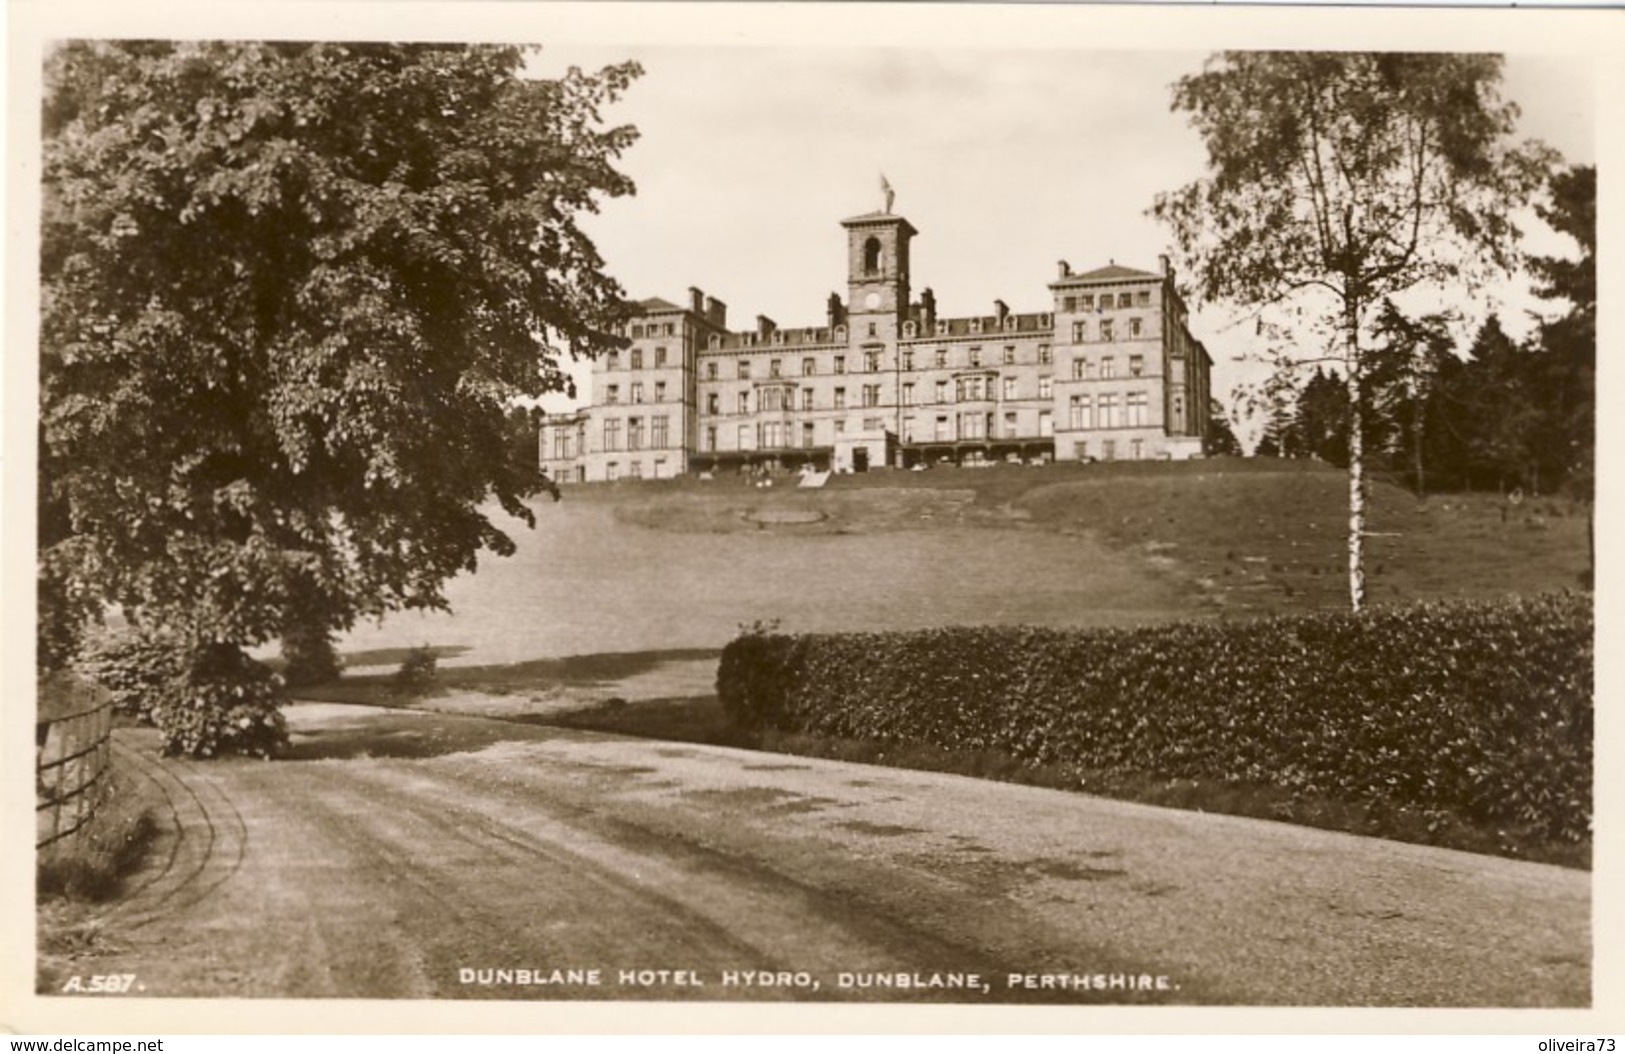 DUNBLANE HOTEL HYDRO - DUNBLANE - PERTHSHIRE - Wigtownshire